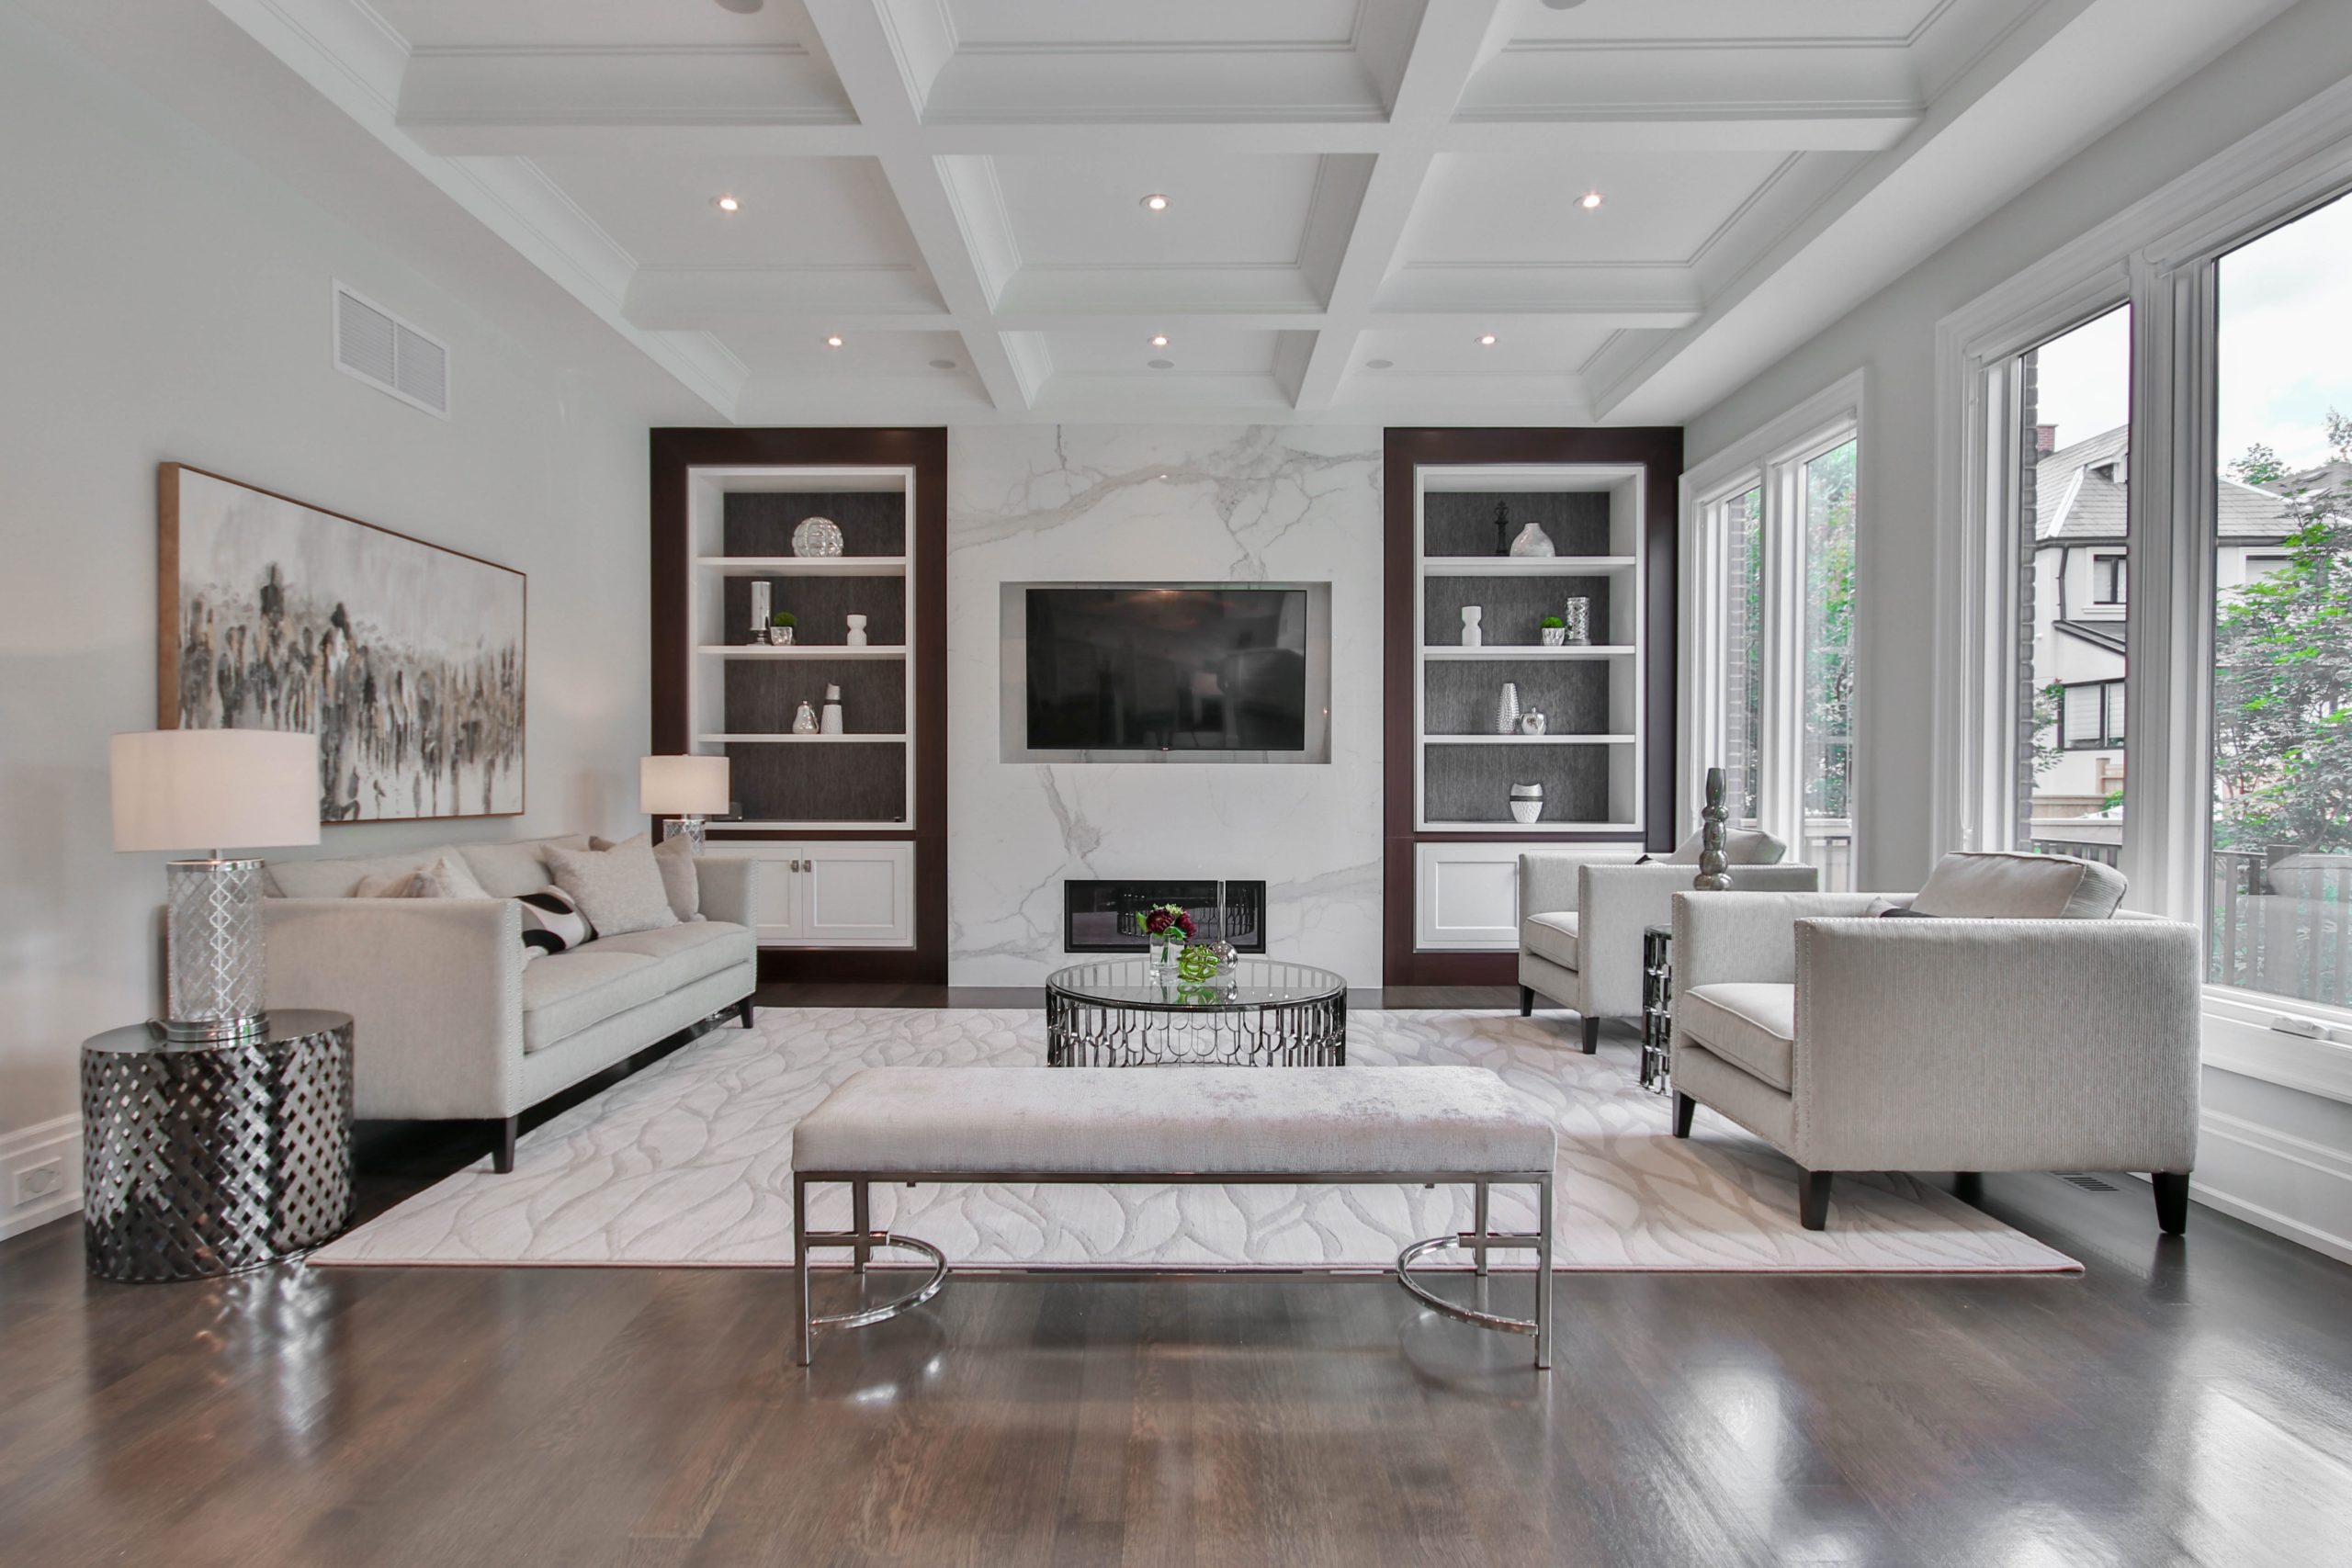 Custom millwork accents - coffered ceiling in white - Latham